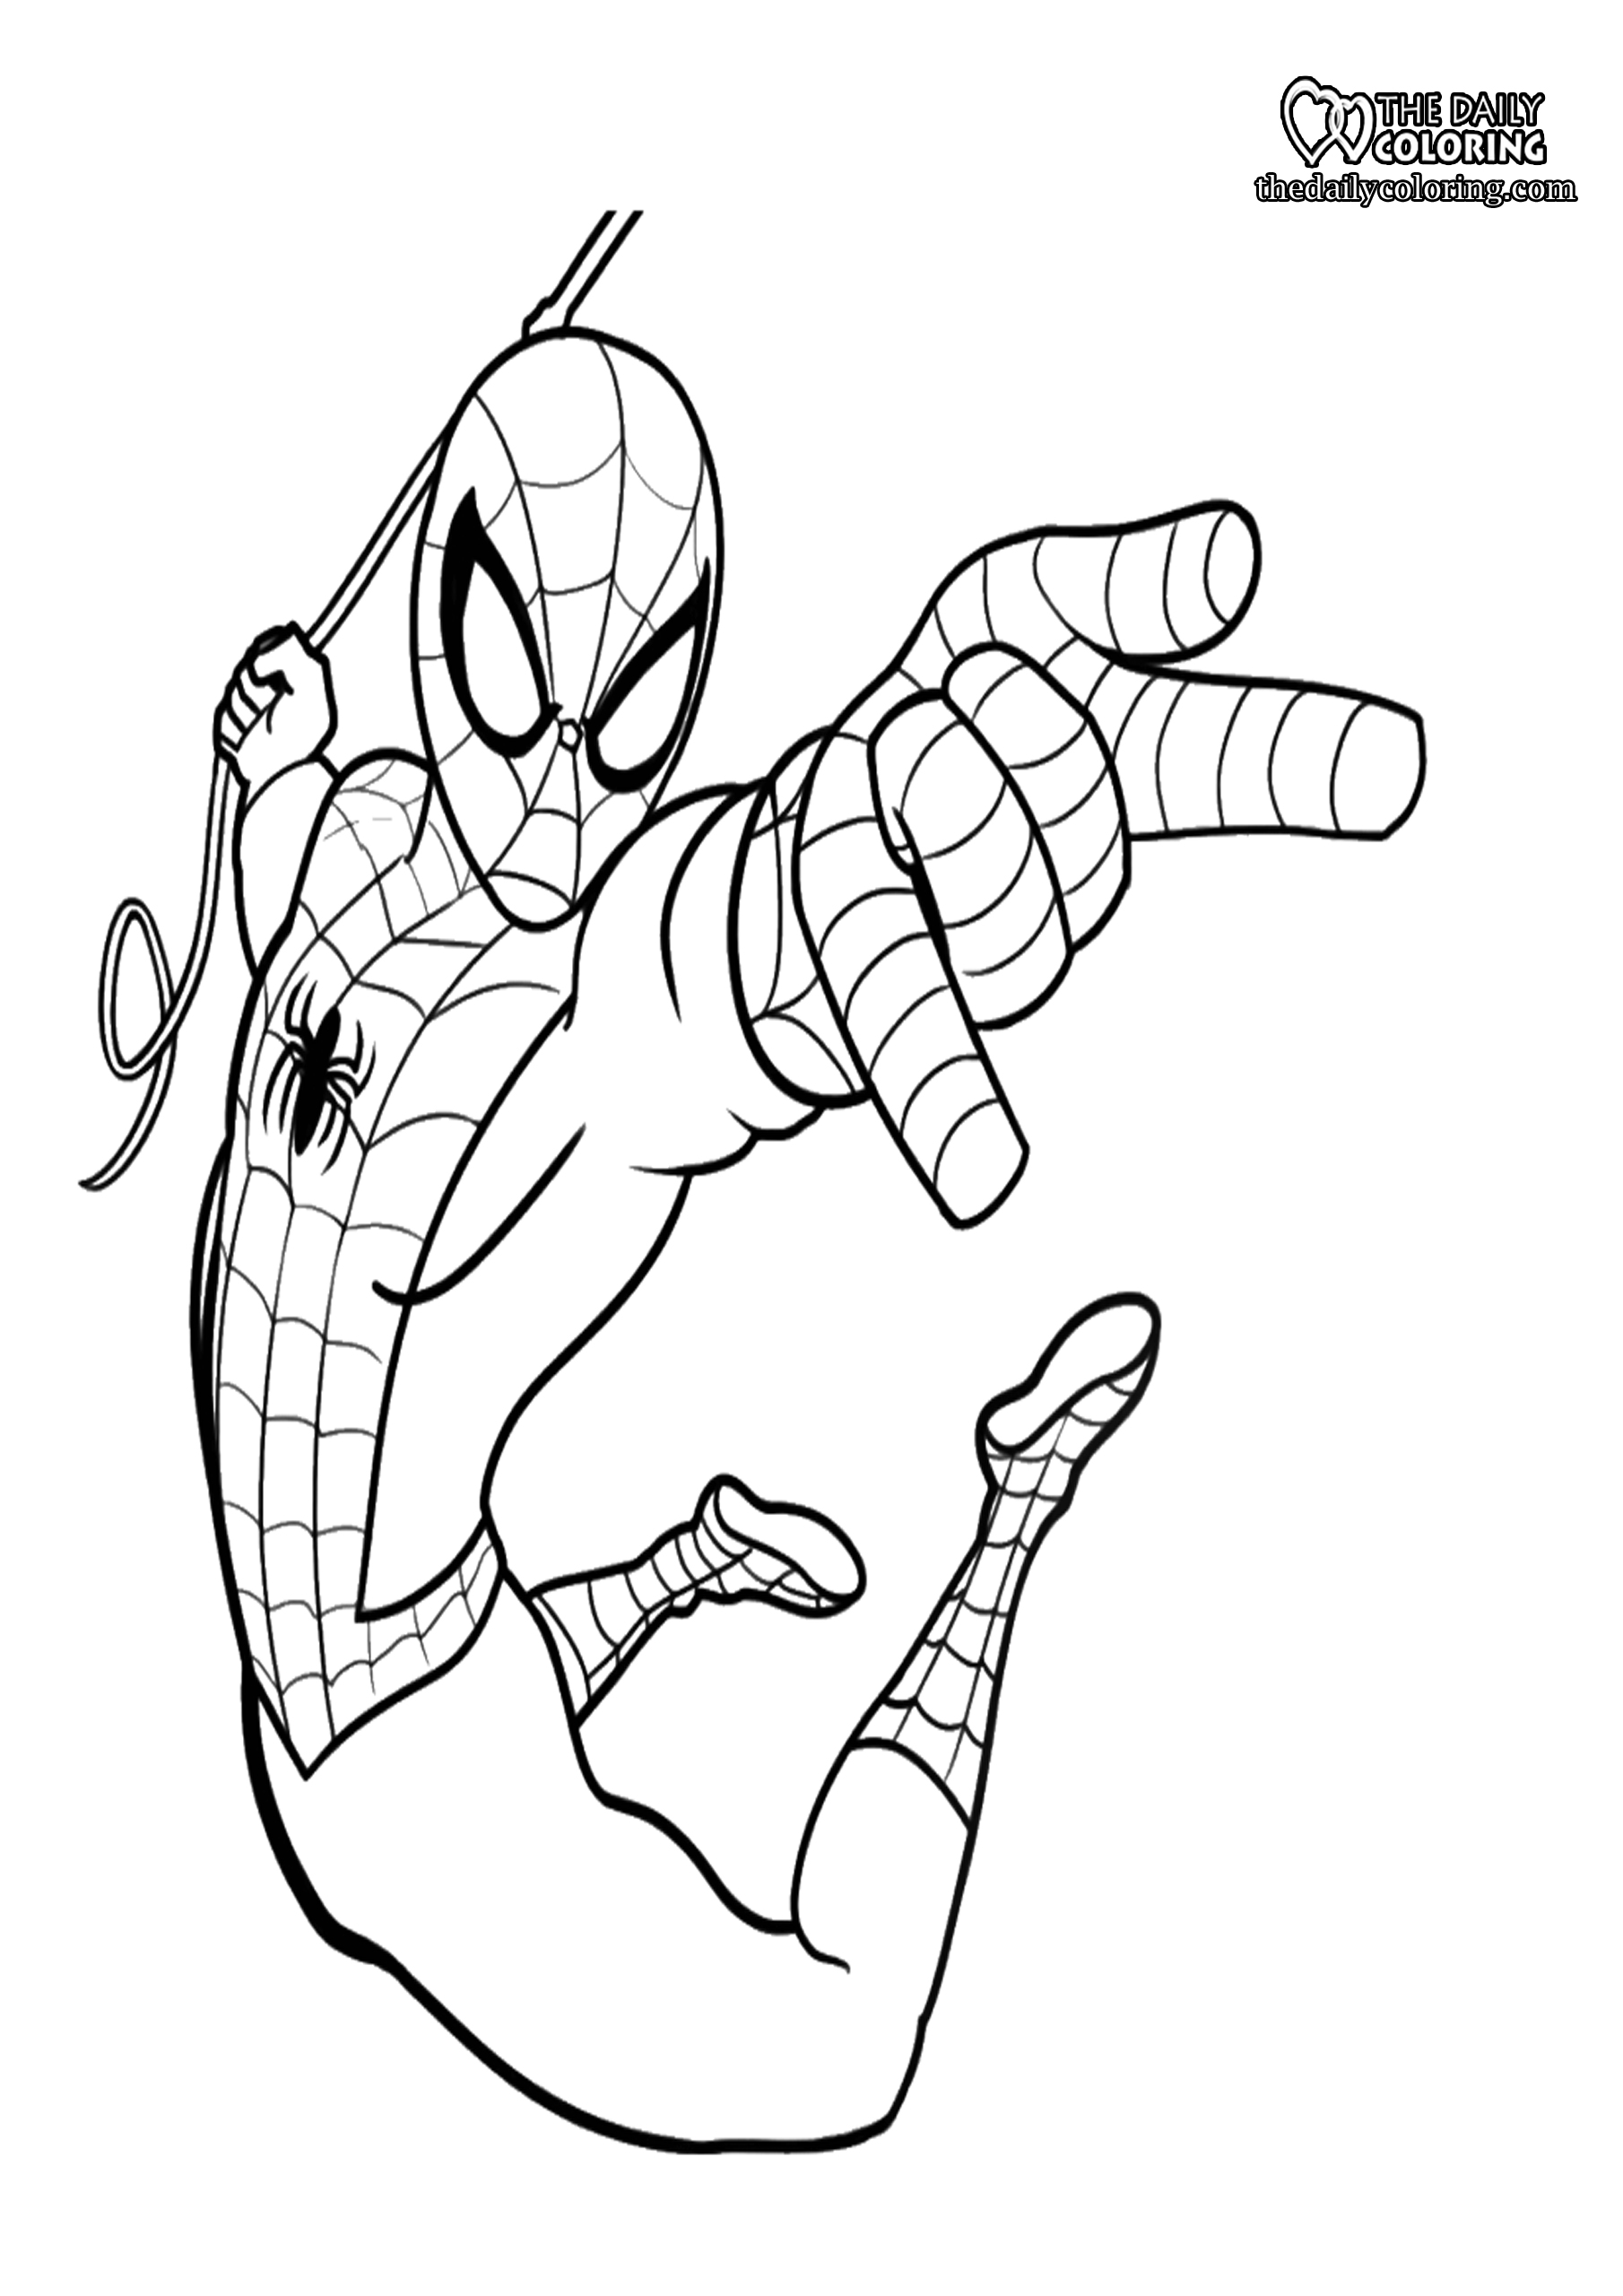 Spiderman Coloring Pages 7+ FULL HD - The Daily Coloring